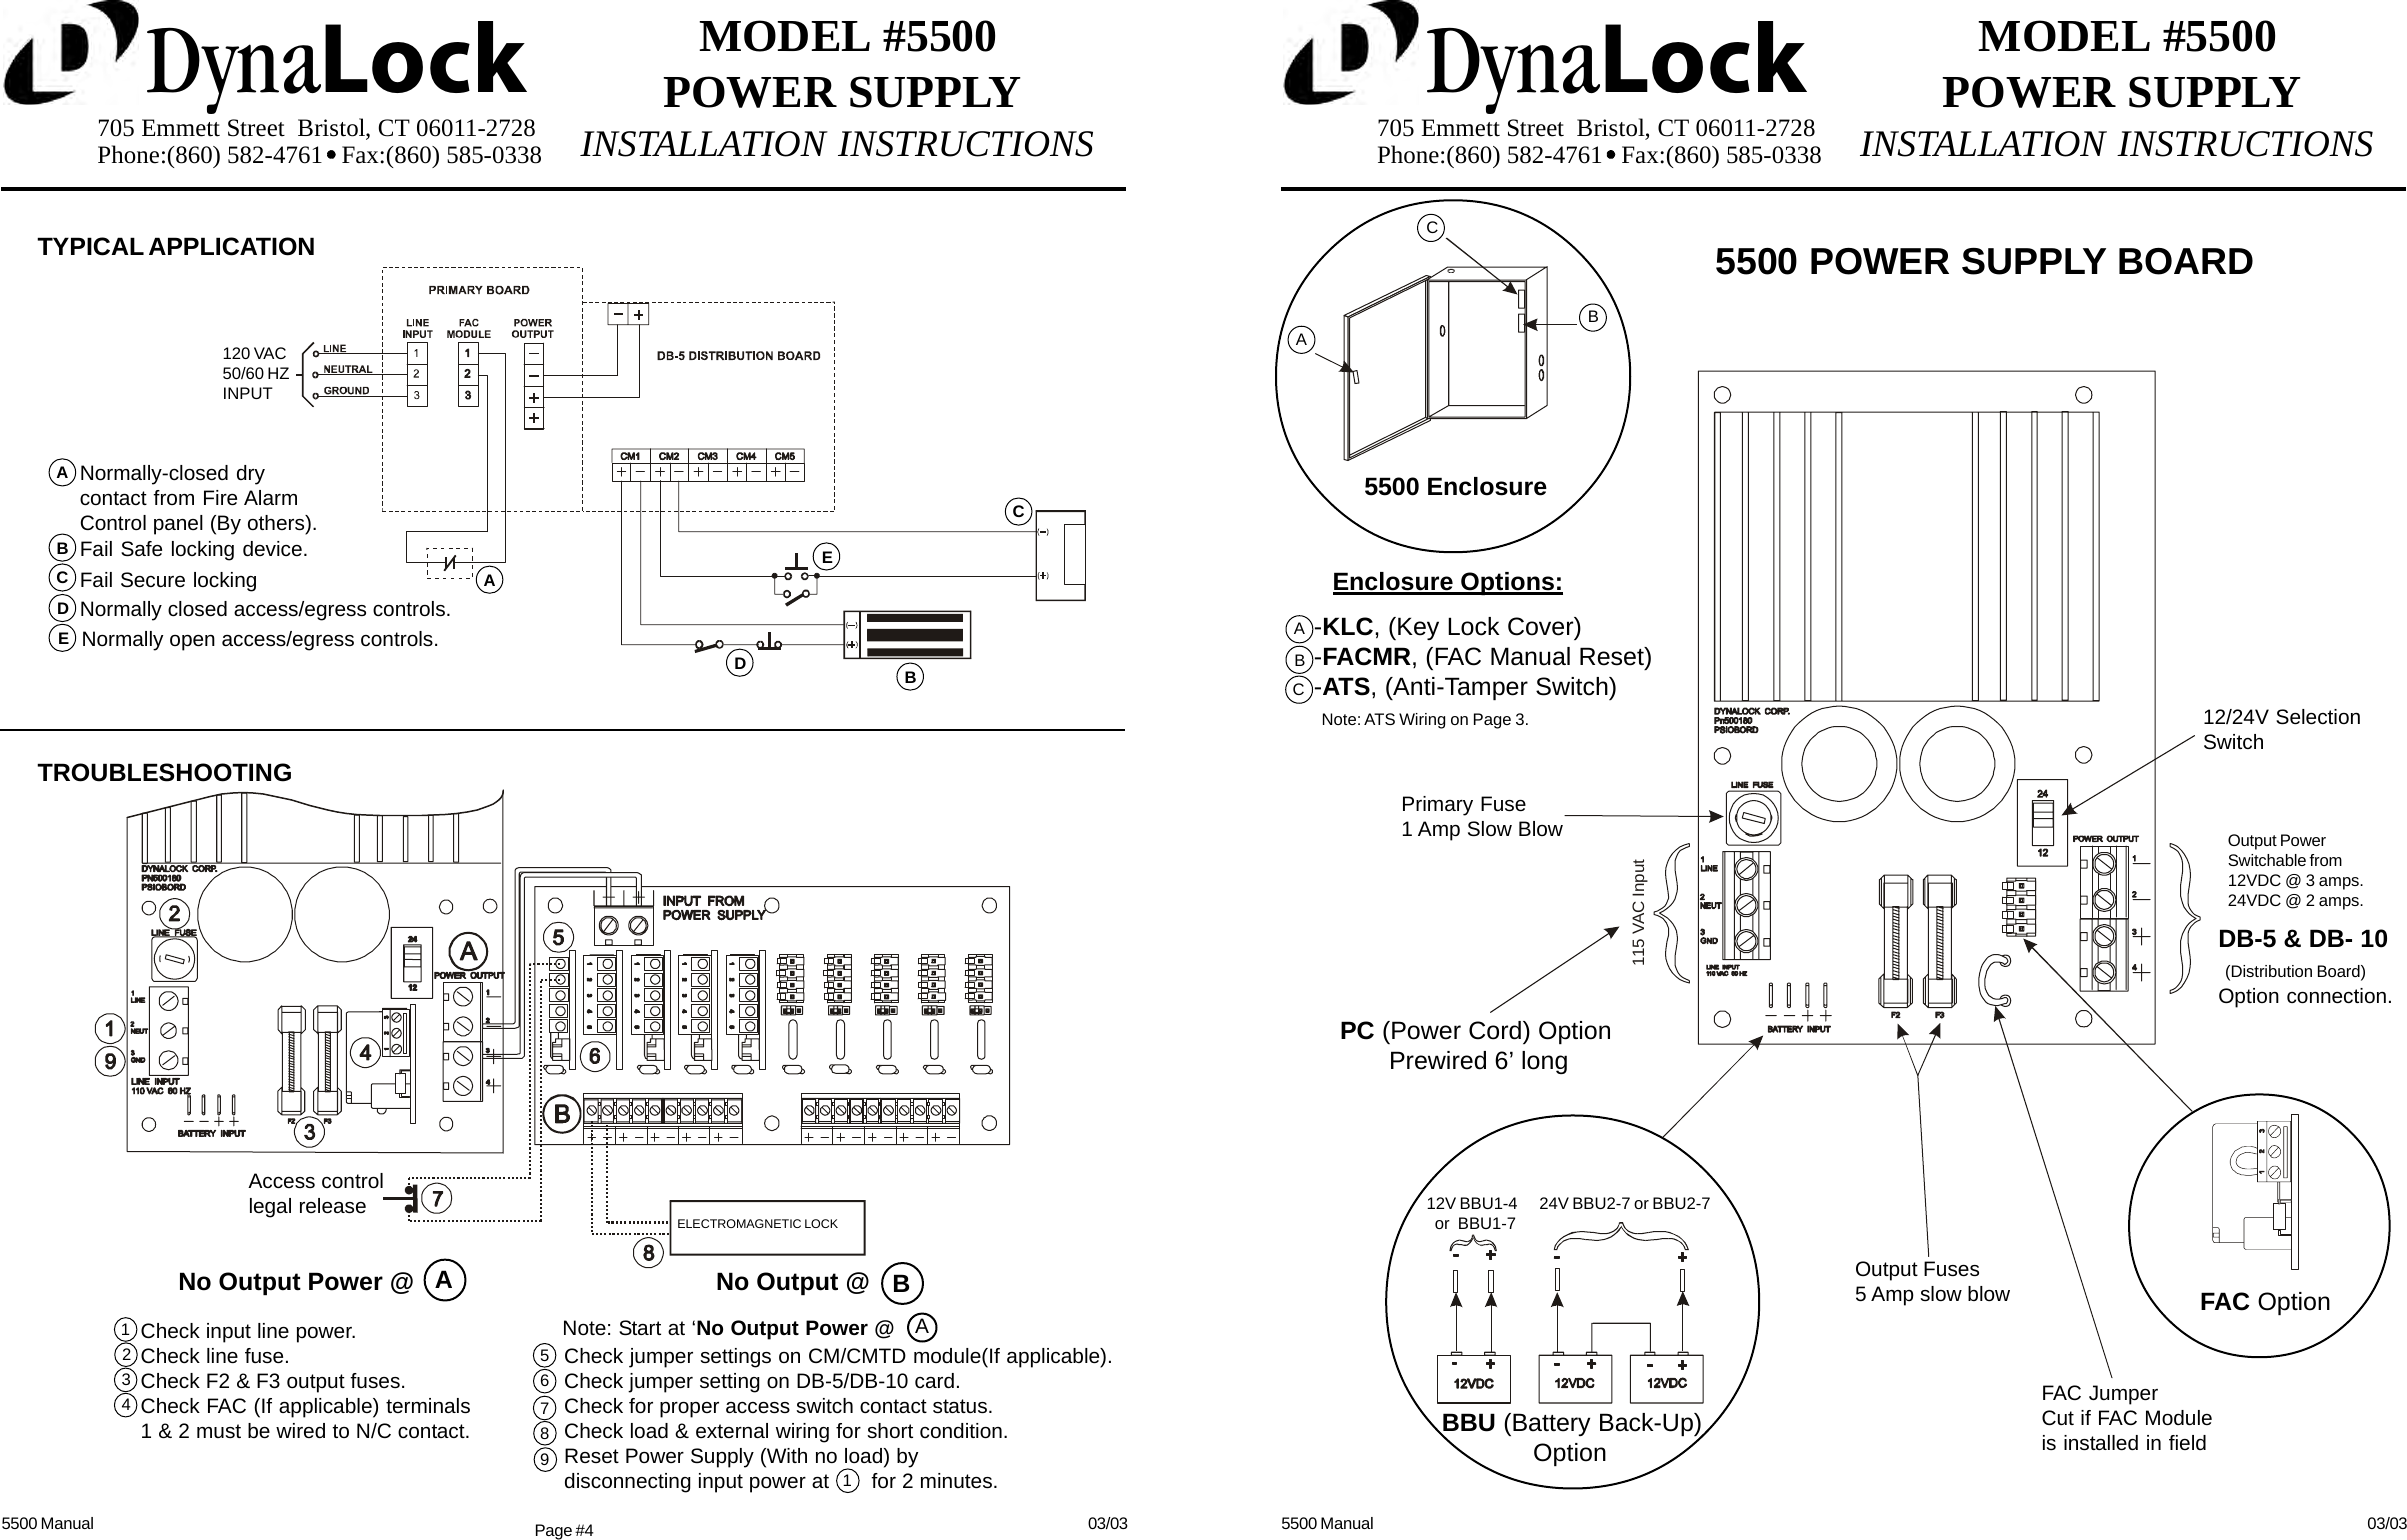 Page 1 of 4 - DynaLock E-Binder 5500 Series Installation Instructions 5500IN